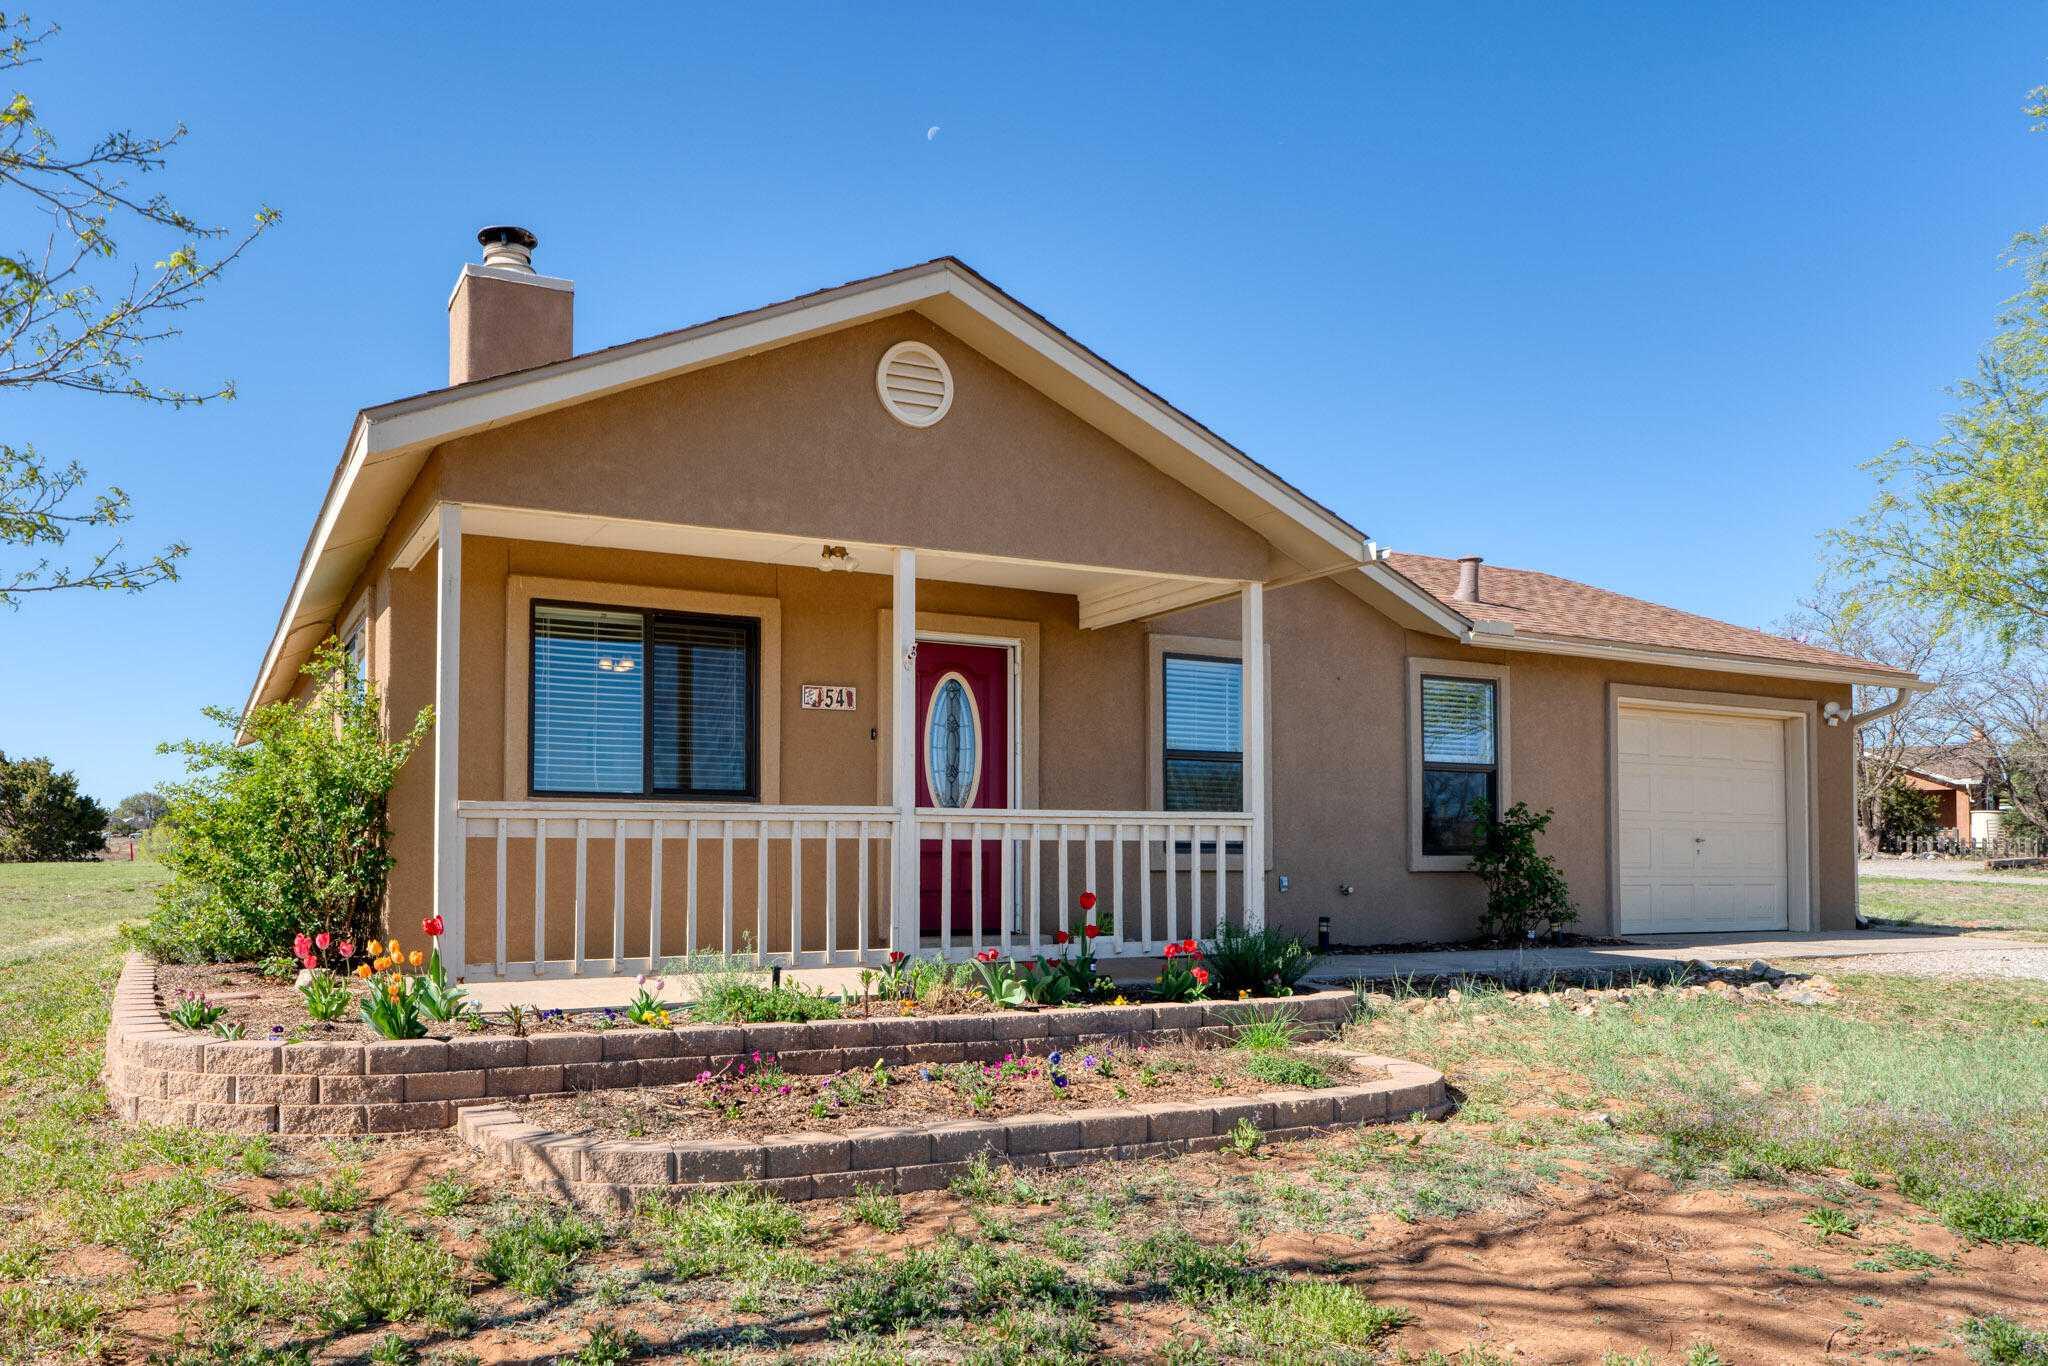 54 Salida Del Sol, 1061253, Edgewood, Detached,  for sale, Eric Pruitt, Berkshire Hathaway HomeServices New Mexico Properties